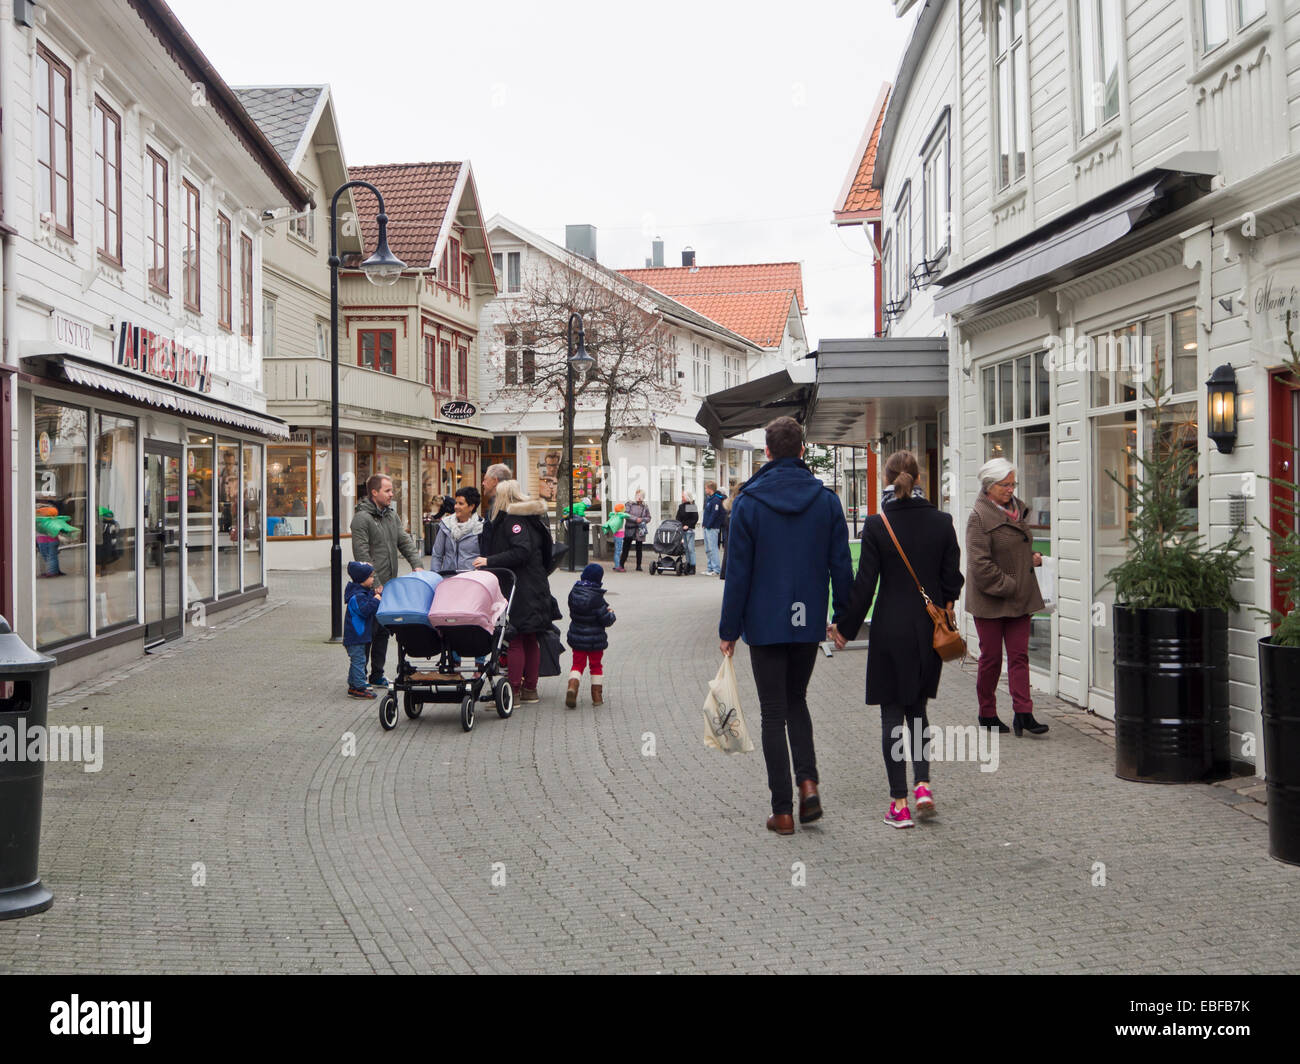 Busy pedestrian only street in the center of the small Norwegian town Egersund, wooden paneled  traditional houses and shops Stock Photo